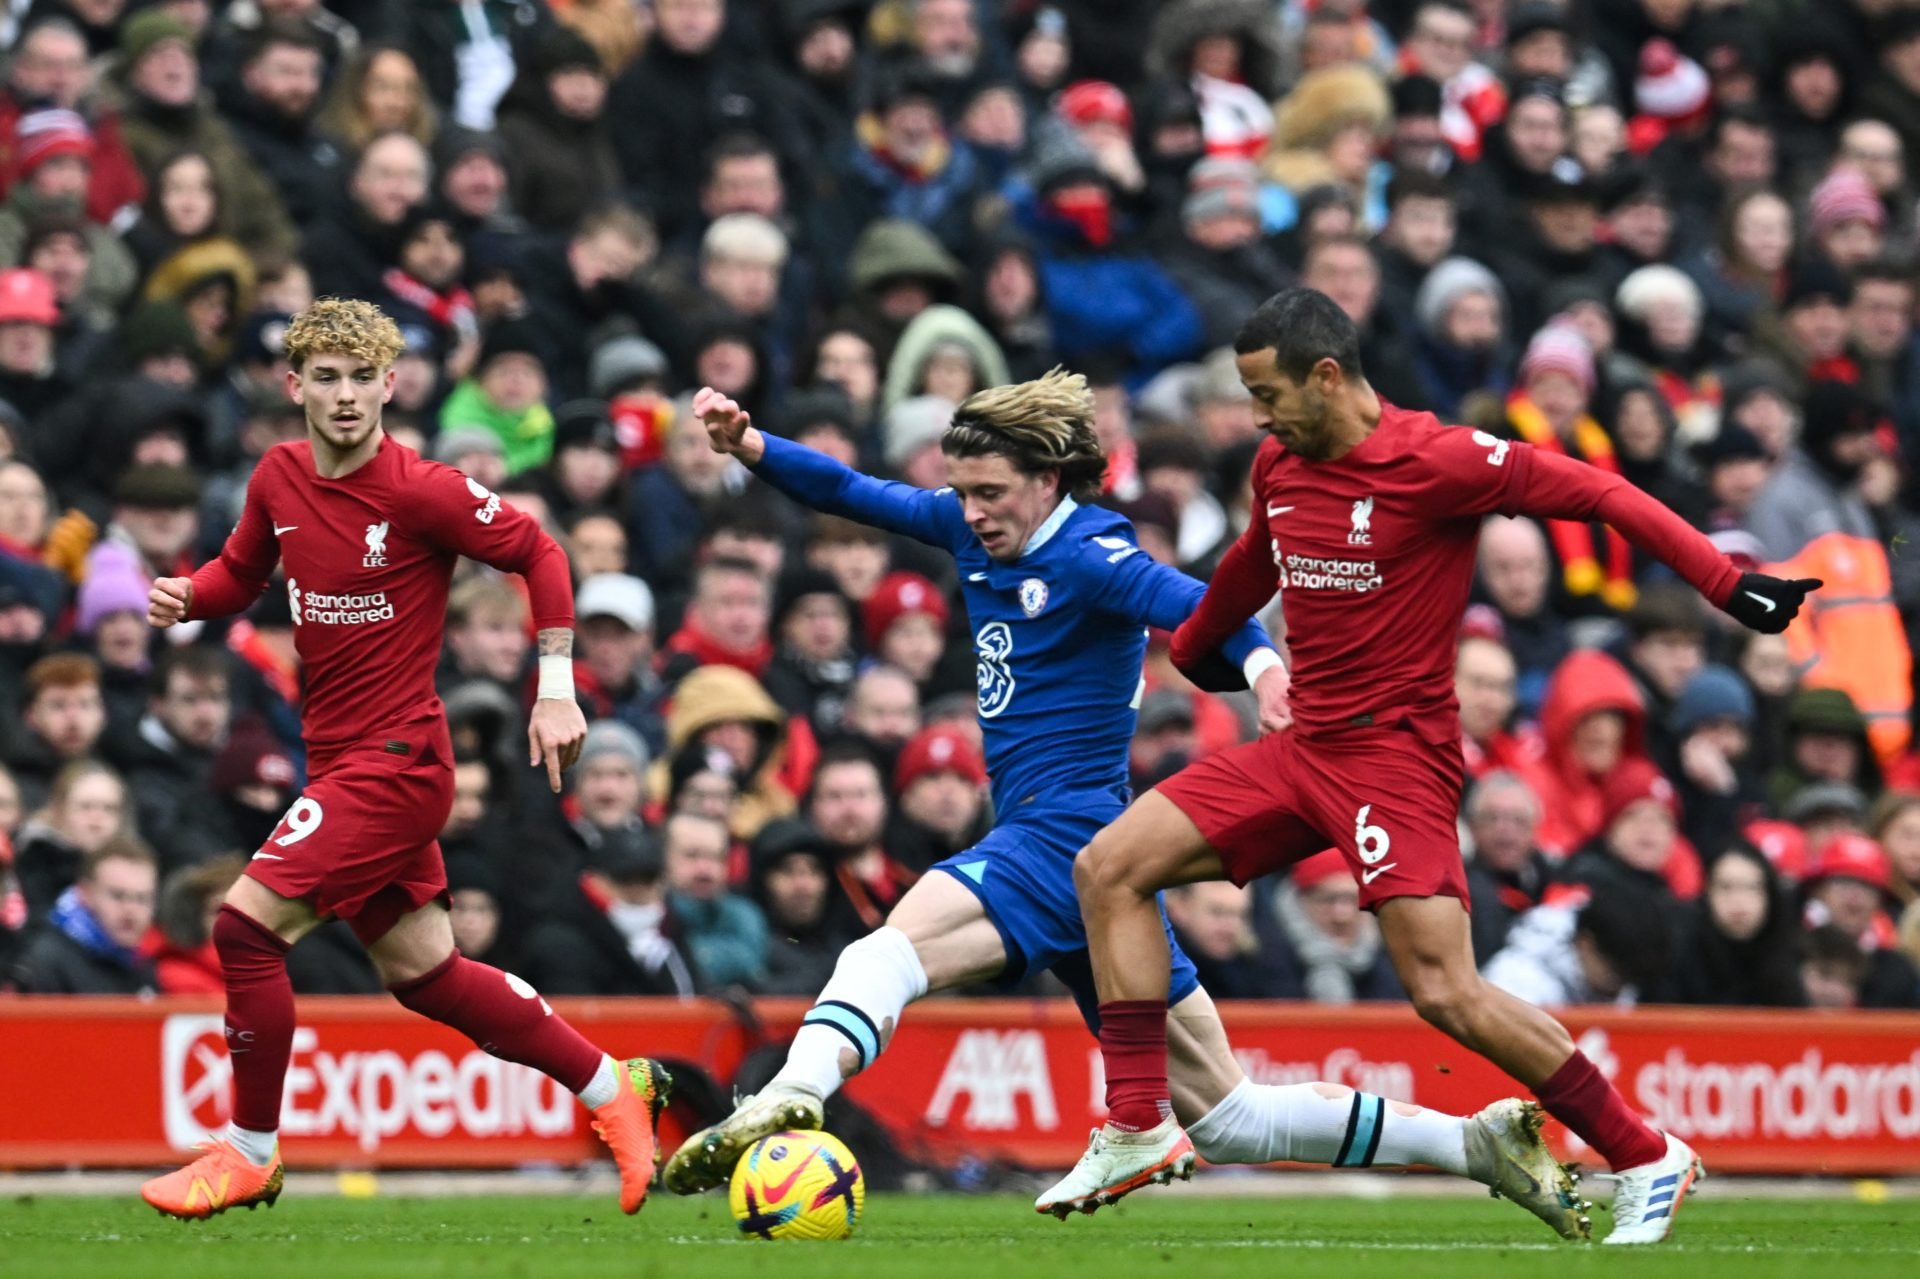 West Ham have real chance to deal big blow to Liverpool by signing ‘immense’ 23-yo – opinion